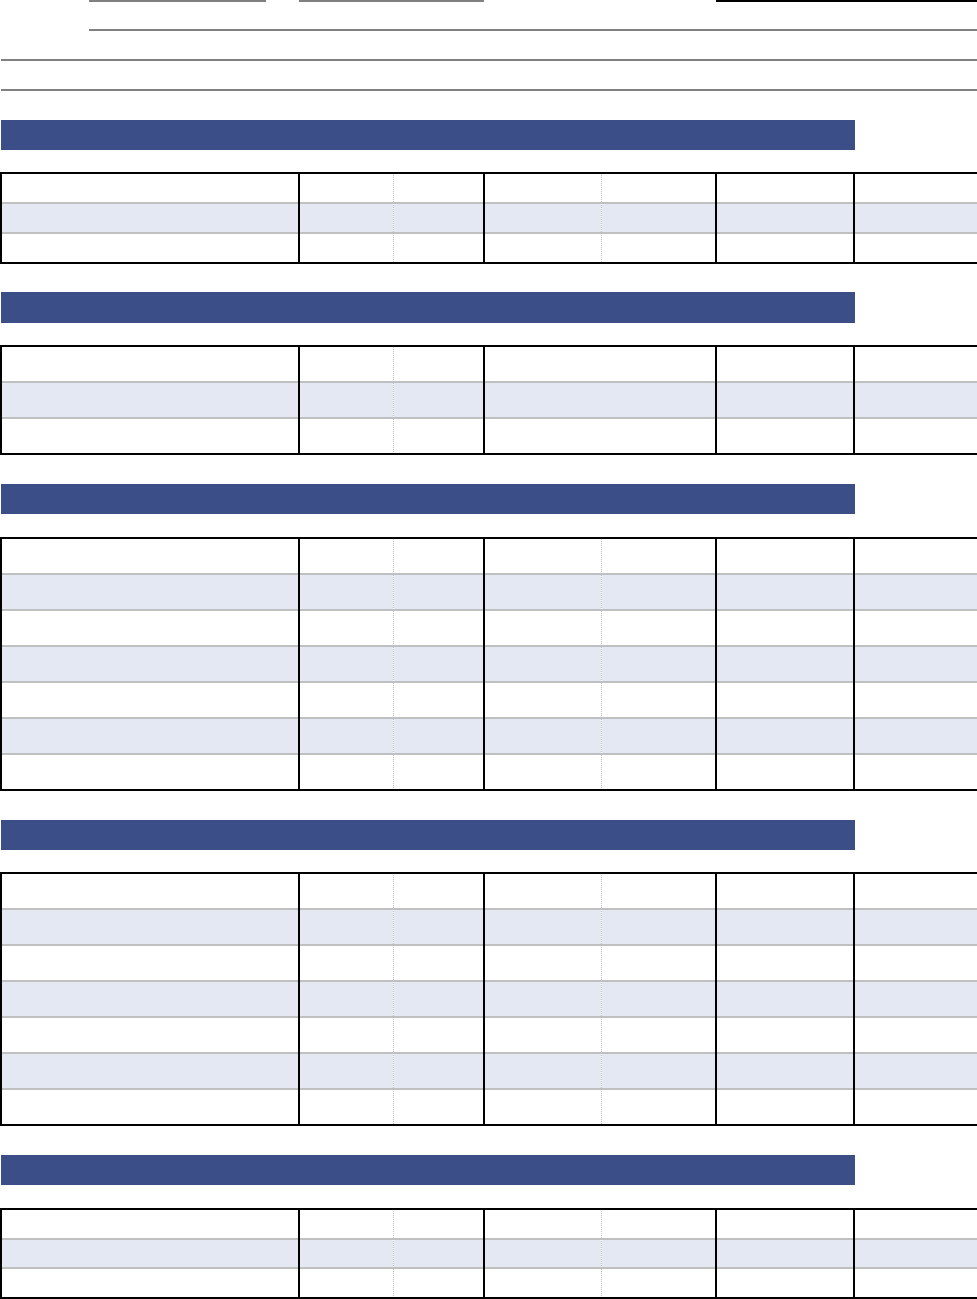 Free Workout Chart Template - xls | 40KB | 4 Page(s)